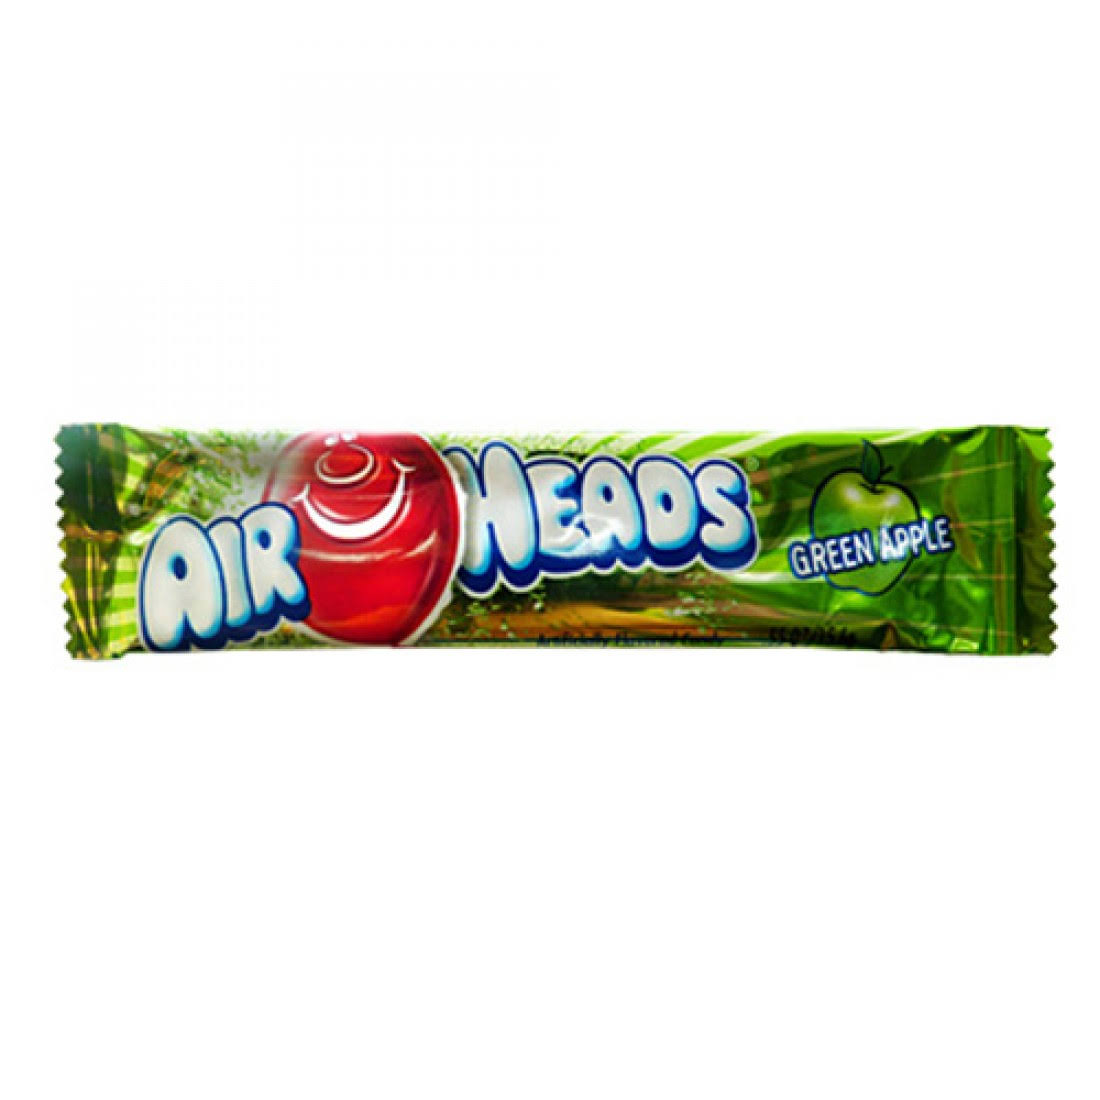 Airheads Candy - Green Apple